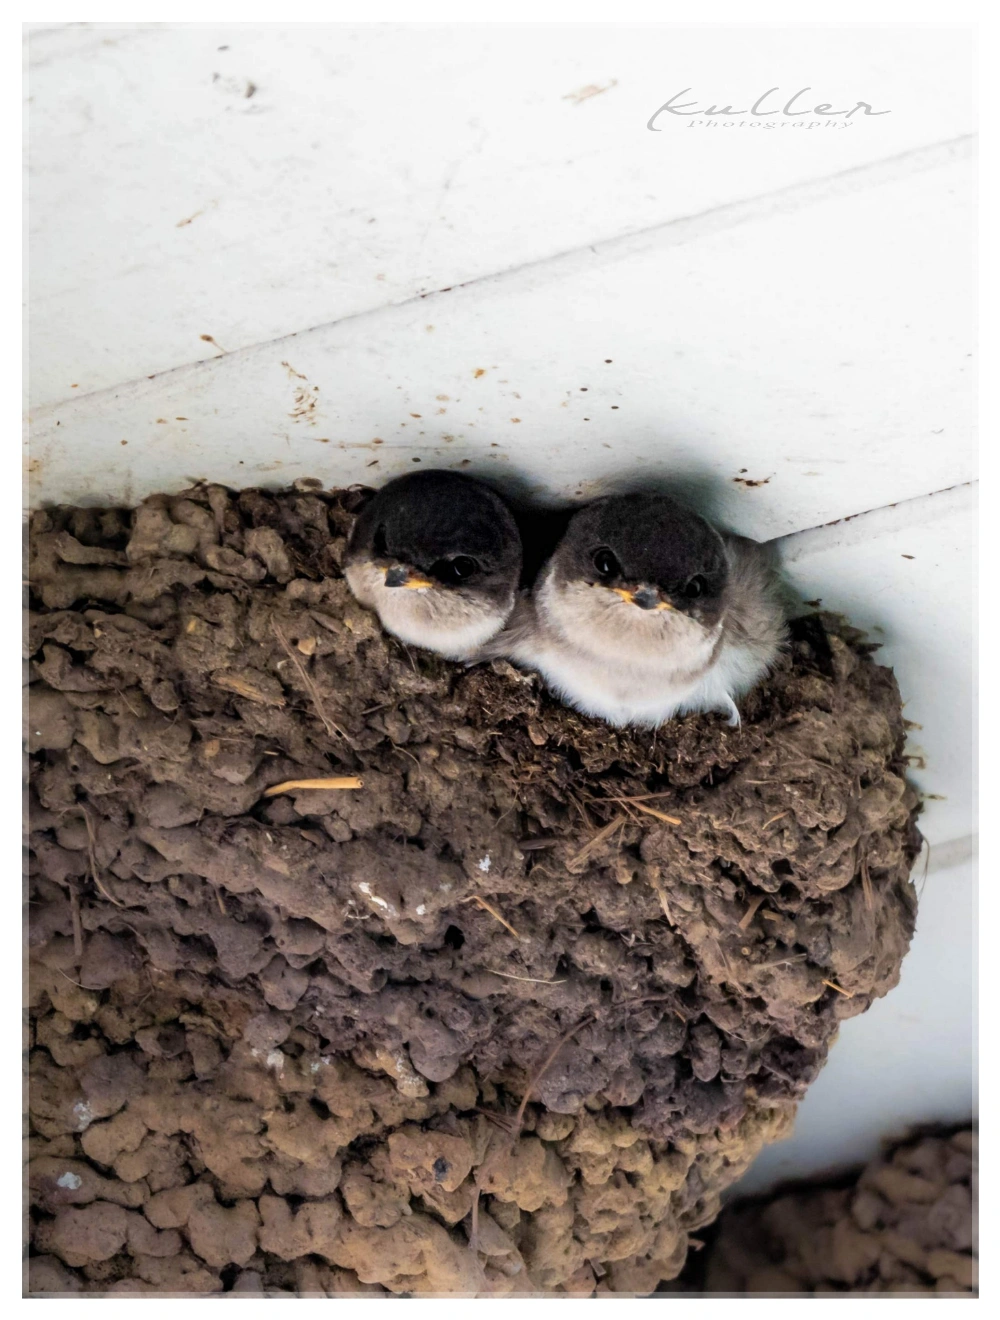 Two House Martin babies